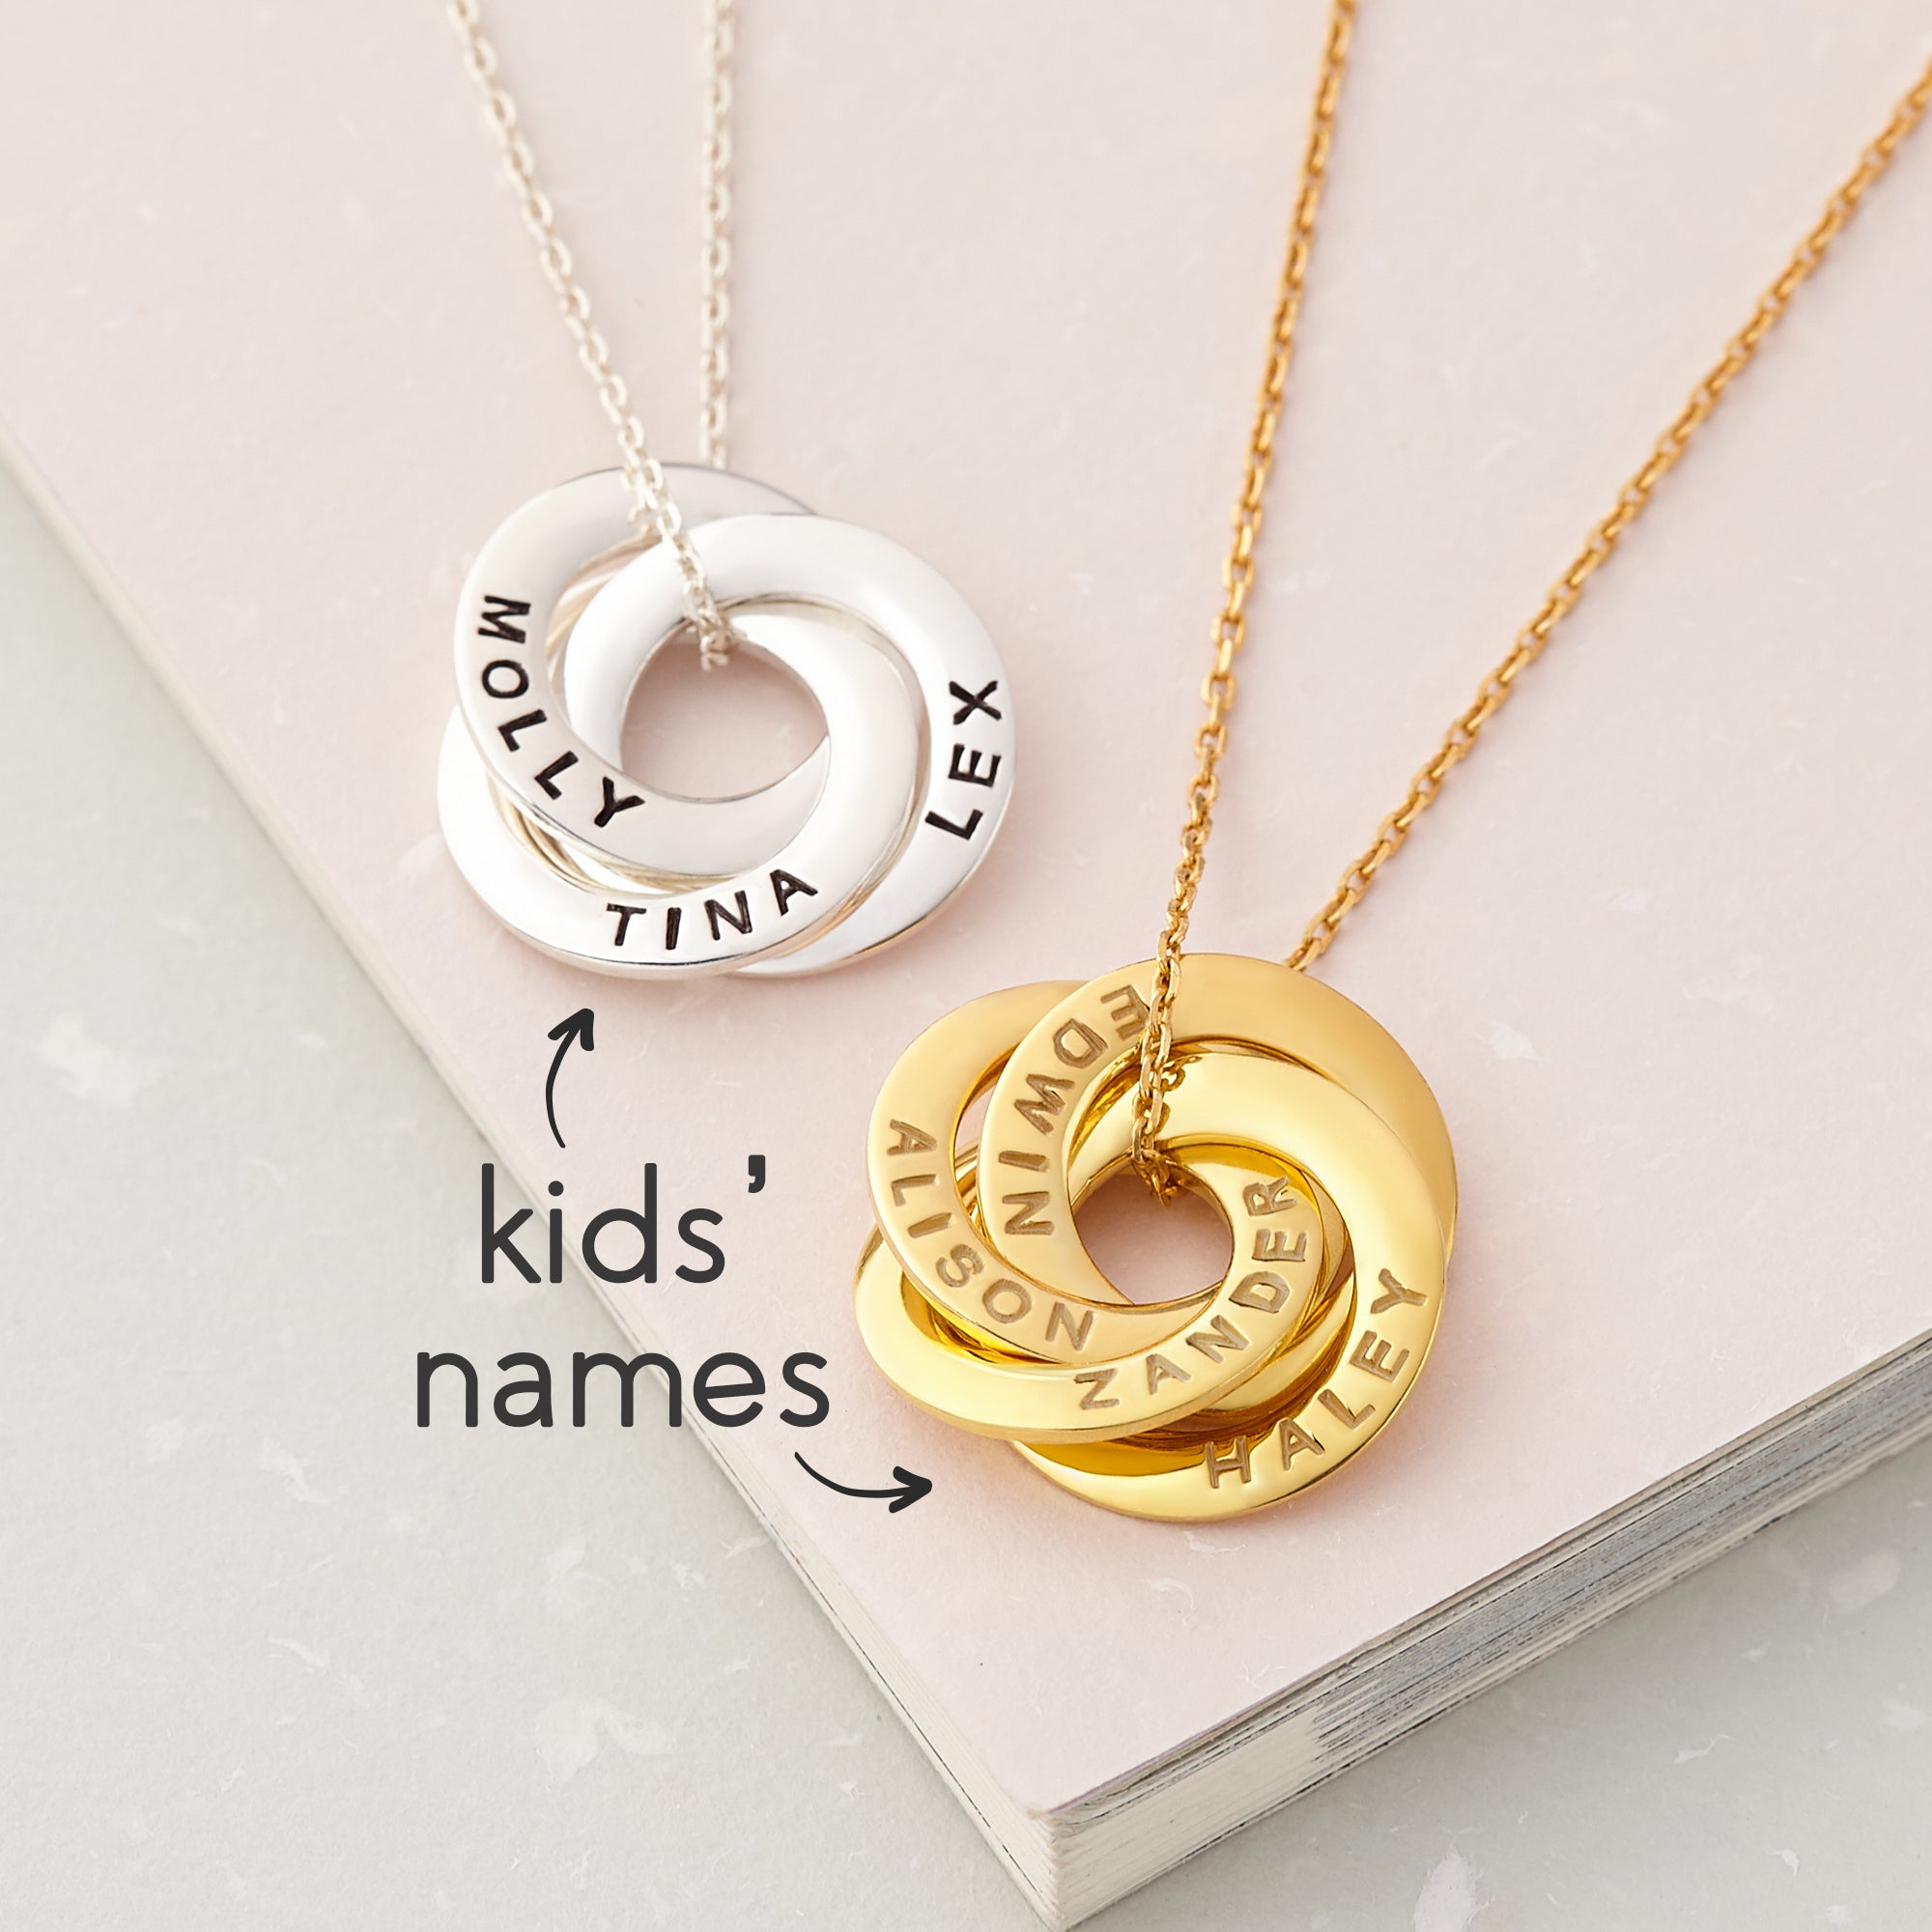 Personalized Mom Jewelry, Kids Names Necklace, Mothers Necklace